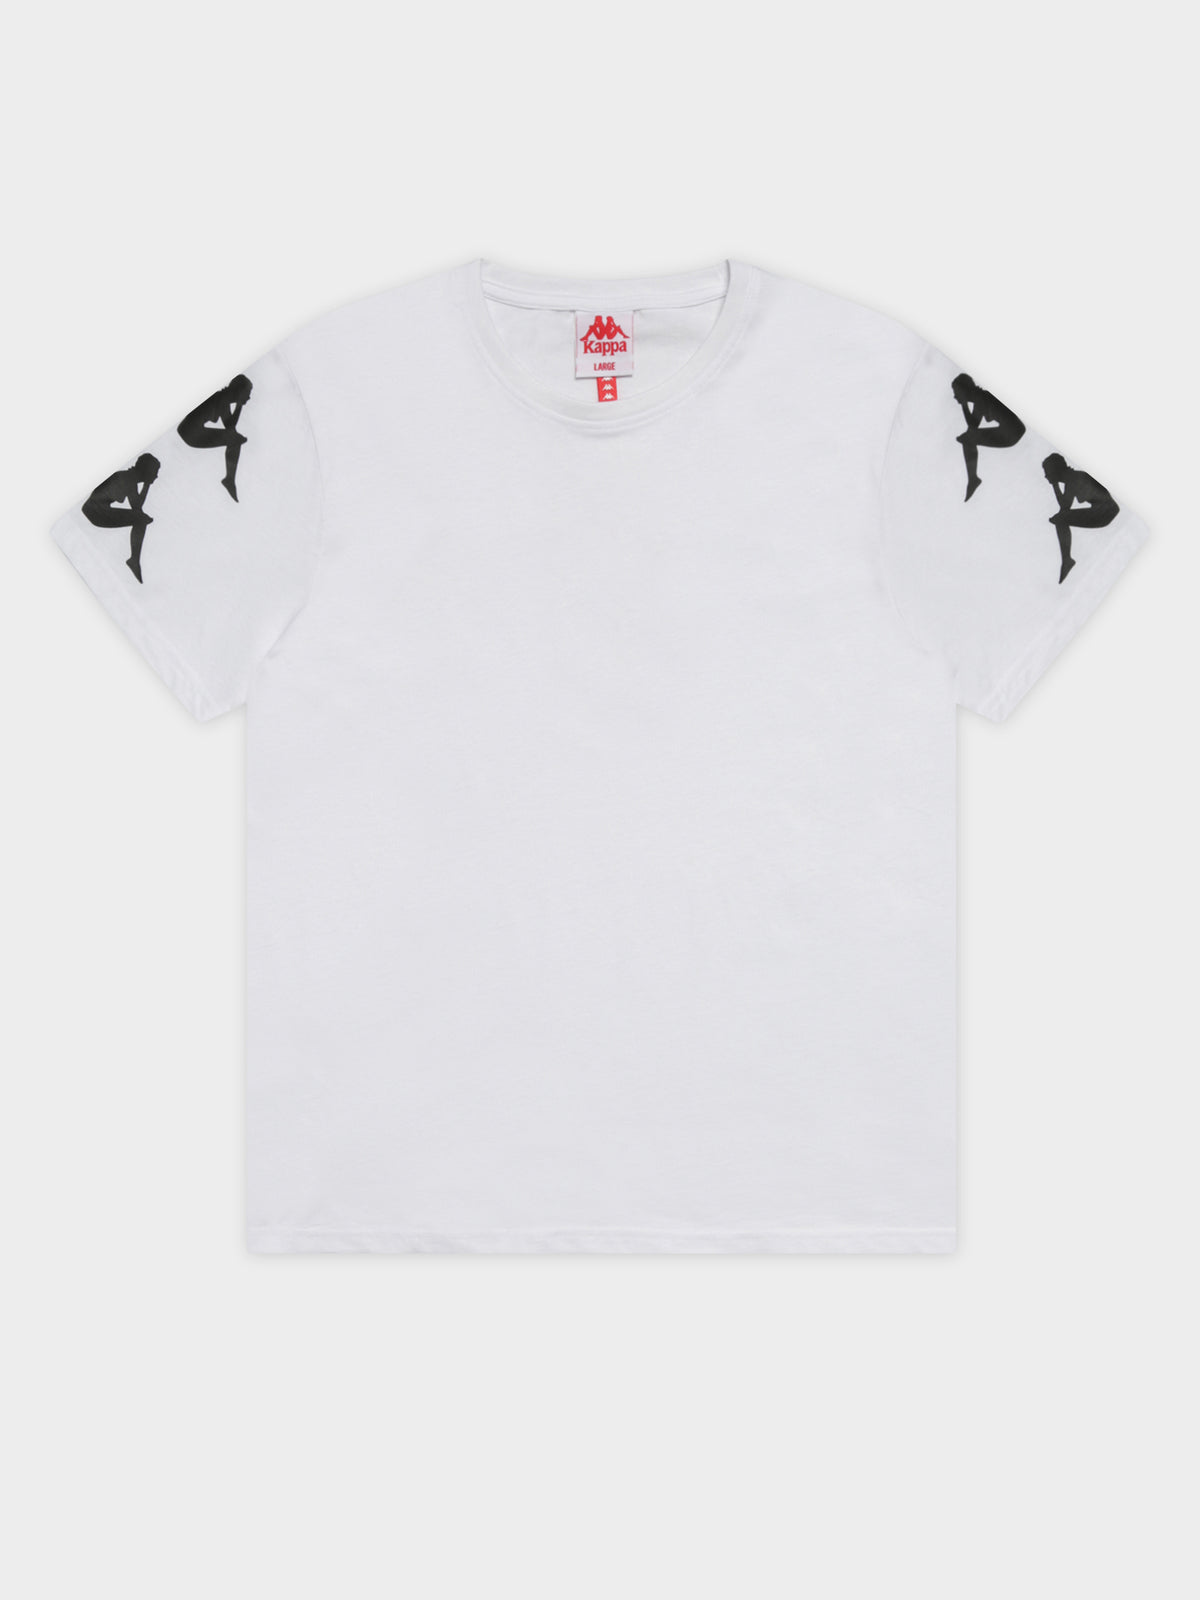 Authentic Reser T-Shirt in White